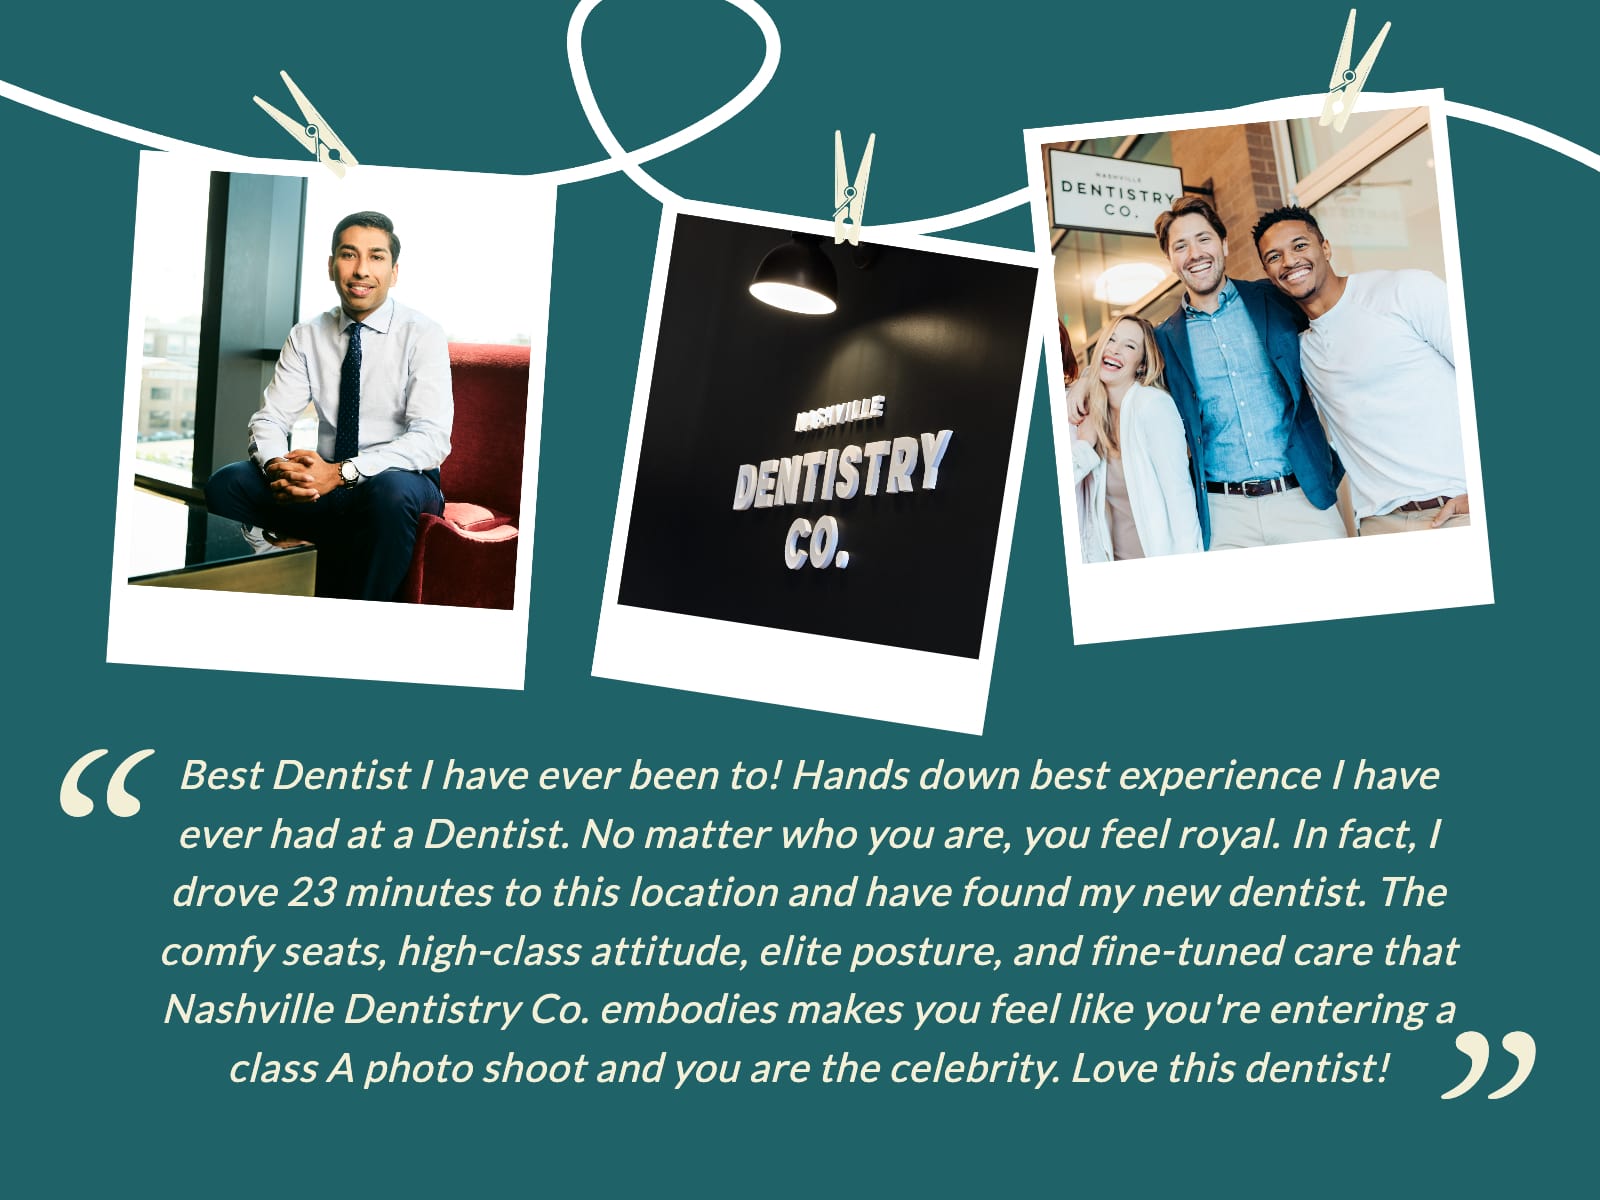 Review stating Dr. Patel is the Best Dentist hands down